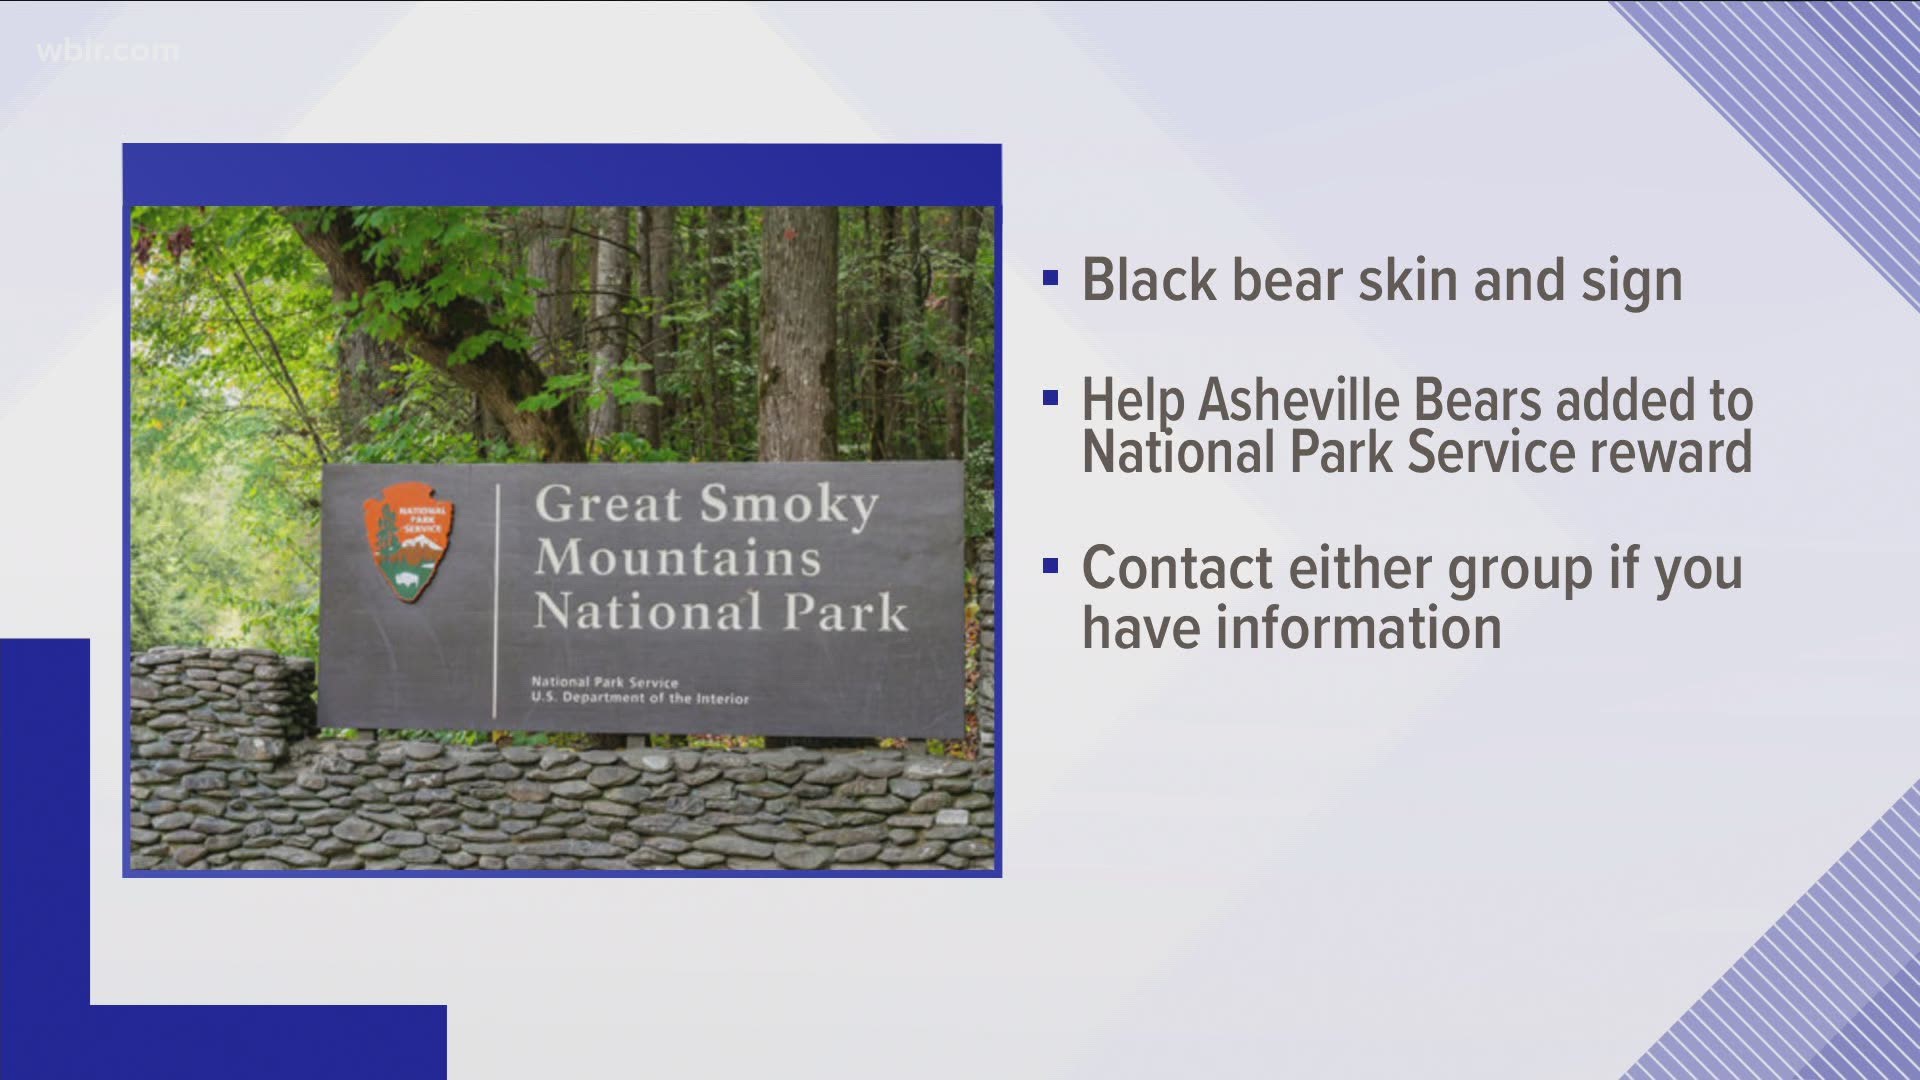 The reward is now up to $10,000 dollars for information leading to the arrest of a person who draped a bearskin over a sign with a racist message at the Smokies.